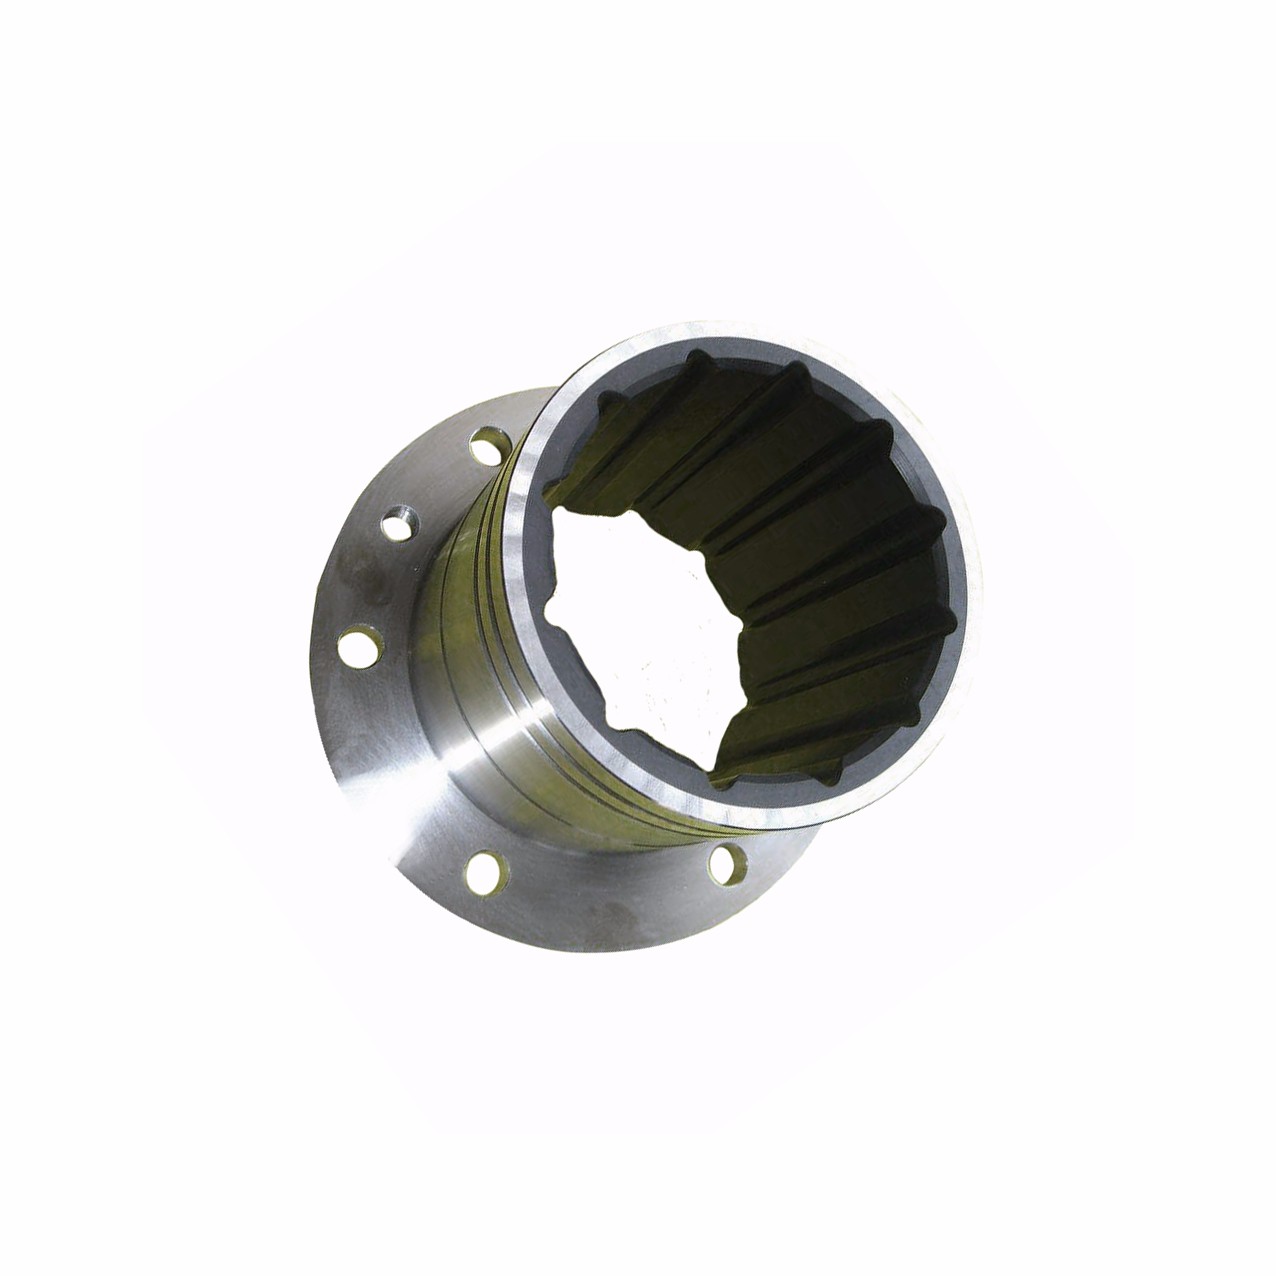 Stern Shaft Bearing With Flange Manufacturers, Stern Shaft Bearing With Flange Factory, Supply Stern Shaft Bearing With Flange